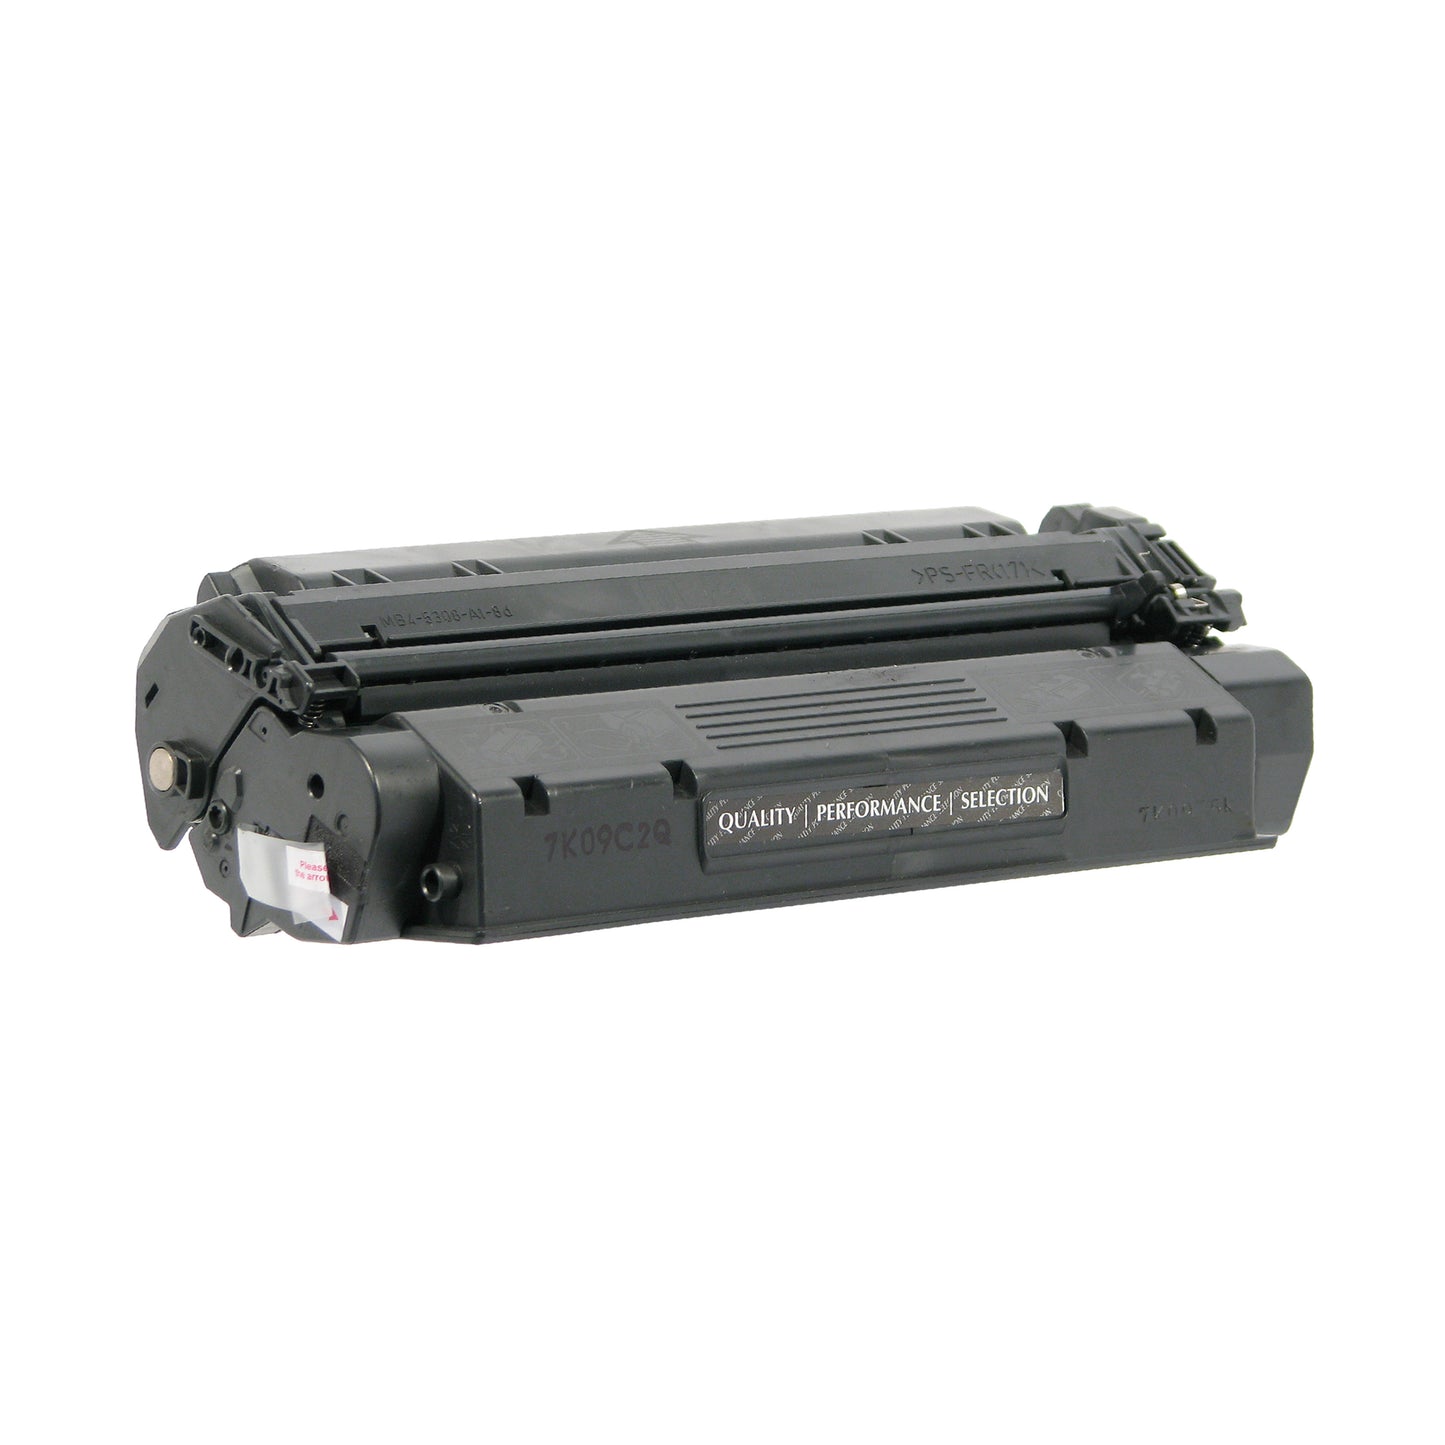 Canon S35/FX8 (7833A001AA/8955A001AA) Remanufactured Universal Toner Cartridge